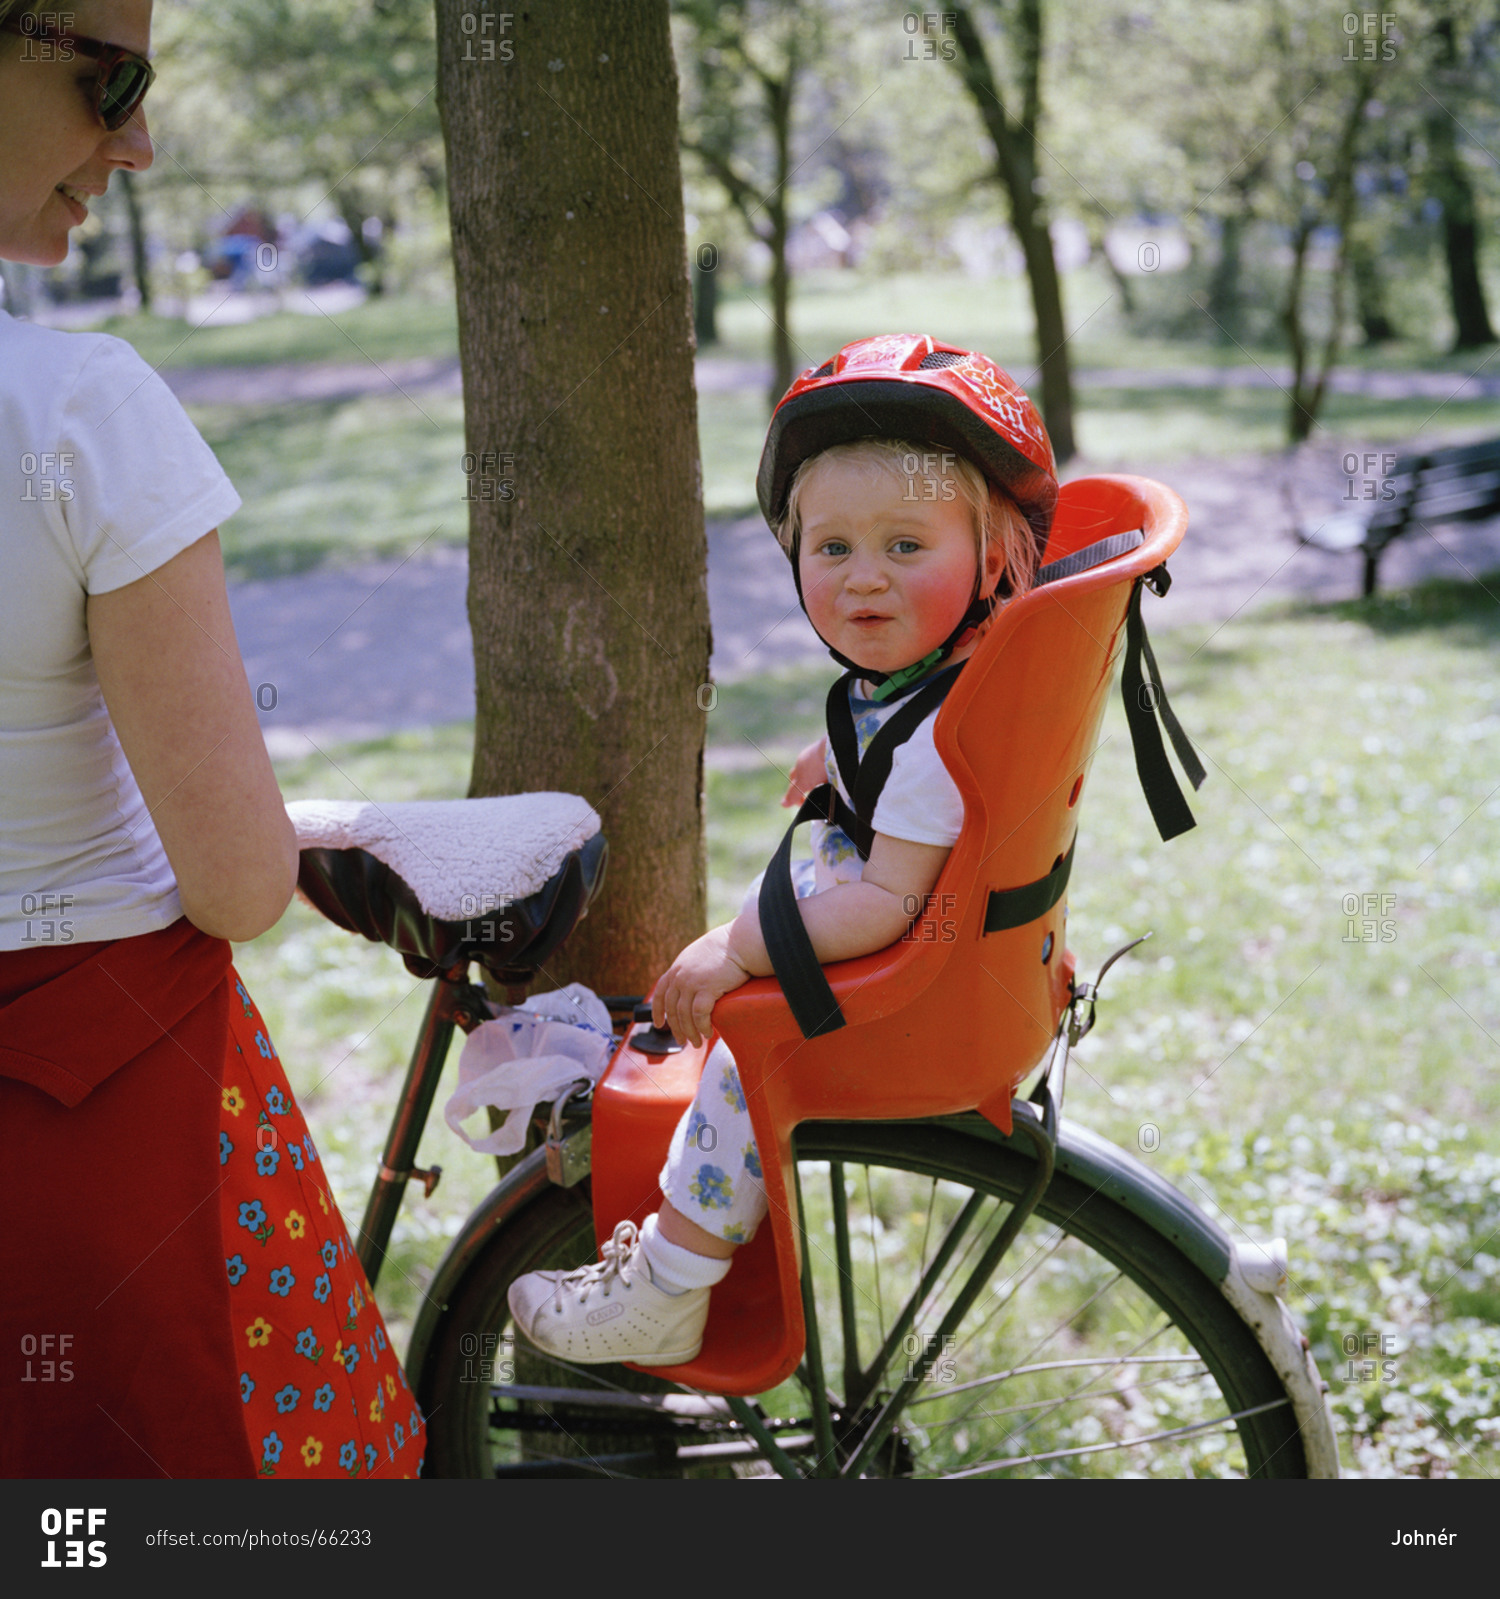 A little girl sitting in a child''s seat on a bicycle